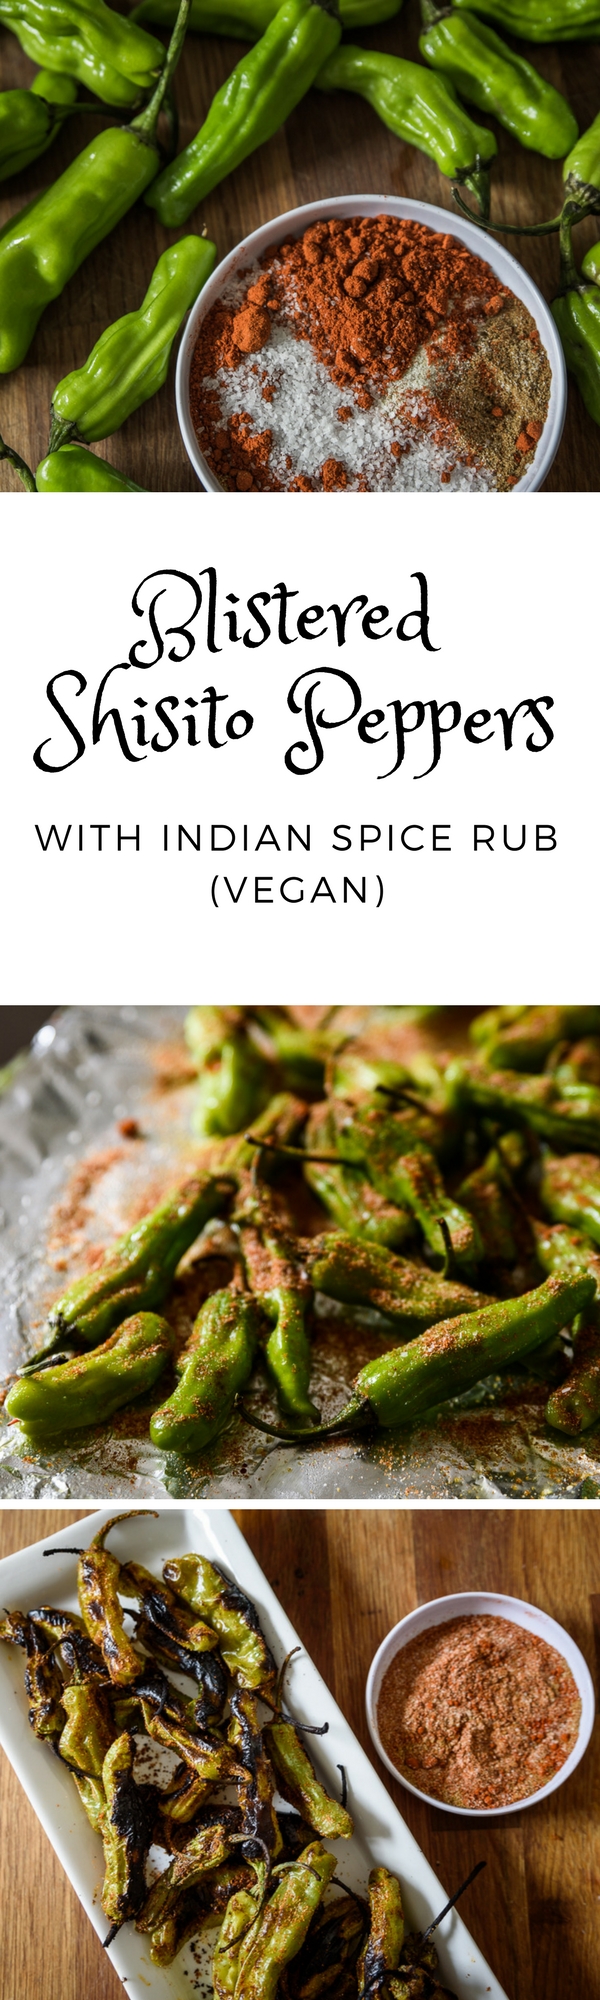 You need these Blistered Shisito Peppers to get your next party started! Japanese shisito peppers are paired with flavor-packed southwest spices for an amazing fusion of flavors. Vegan, gluten-free, and Ketogenic Diet friendly!